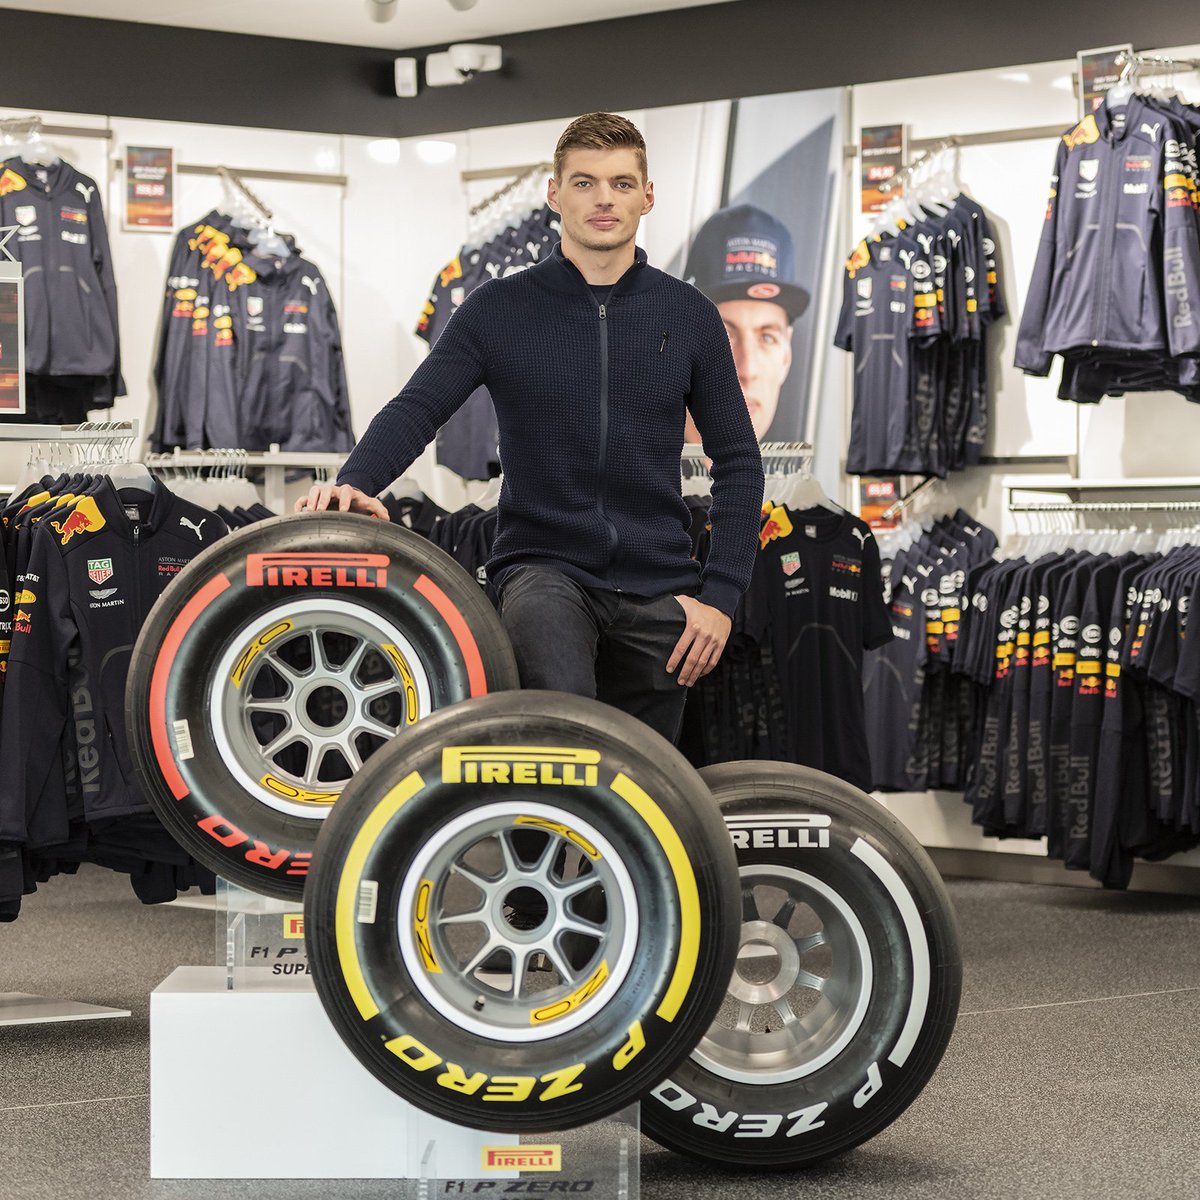 Max Verstappen on Twitter: "The F1 I at the are now on display at the Max Verstappen store in Swalmen (The Netherlands) 👍 Thanks, @pirellisport! #Fit4F1 https://t.co/H1CfyZYq3p" /